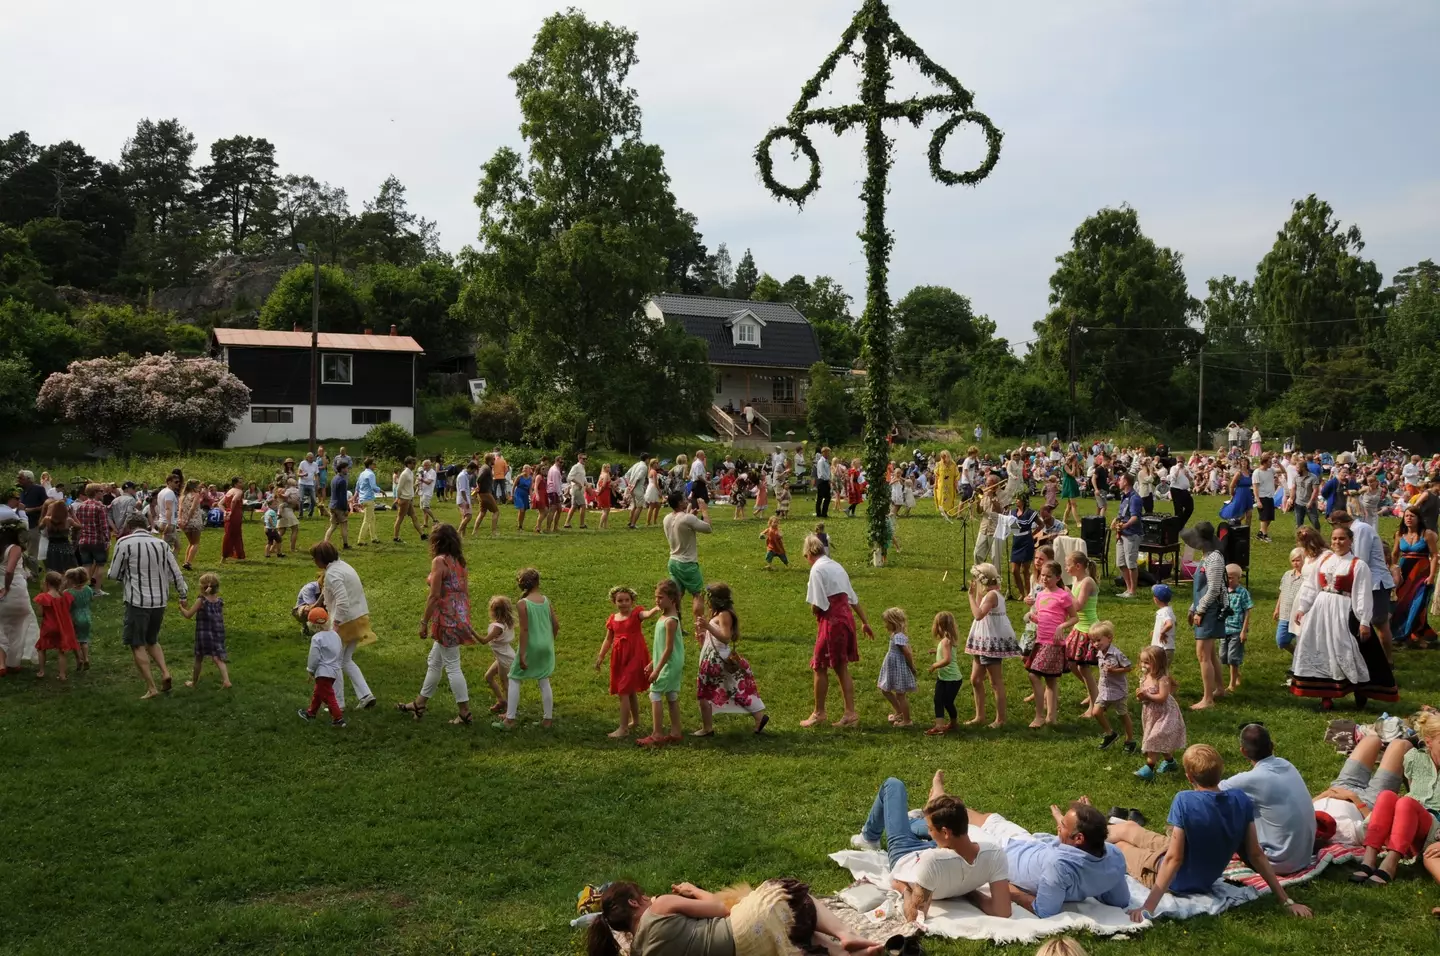 Part of the celebrations sees people dancing around a maypole.